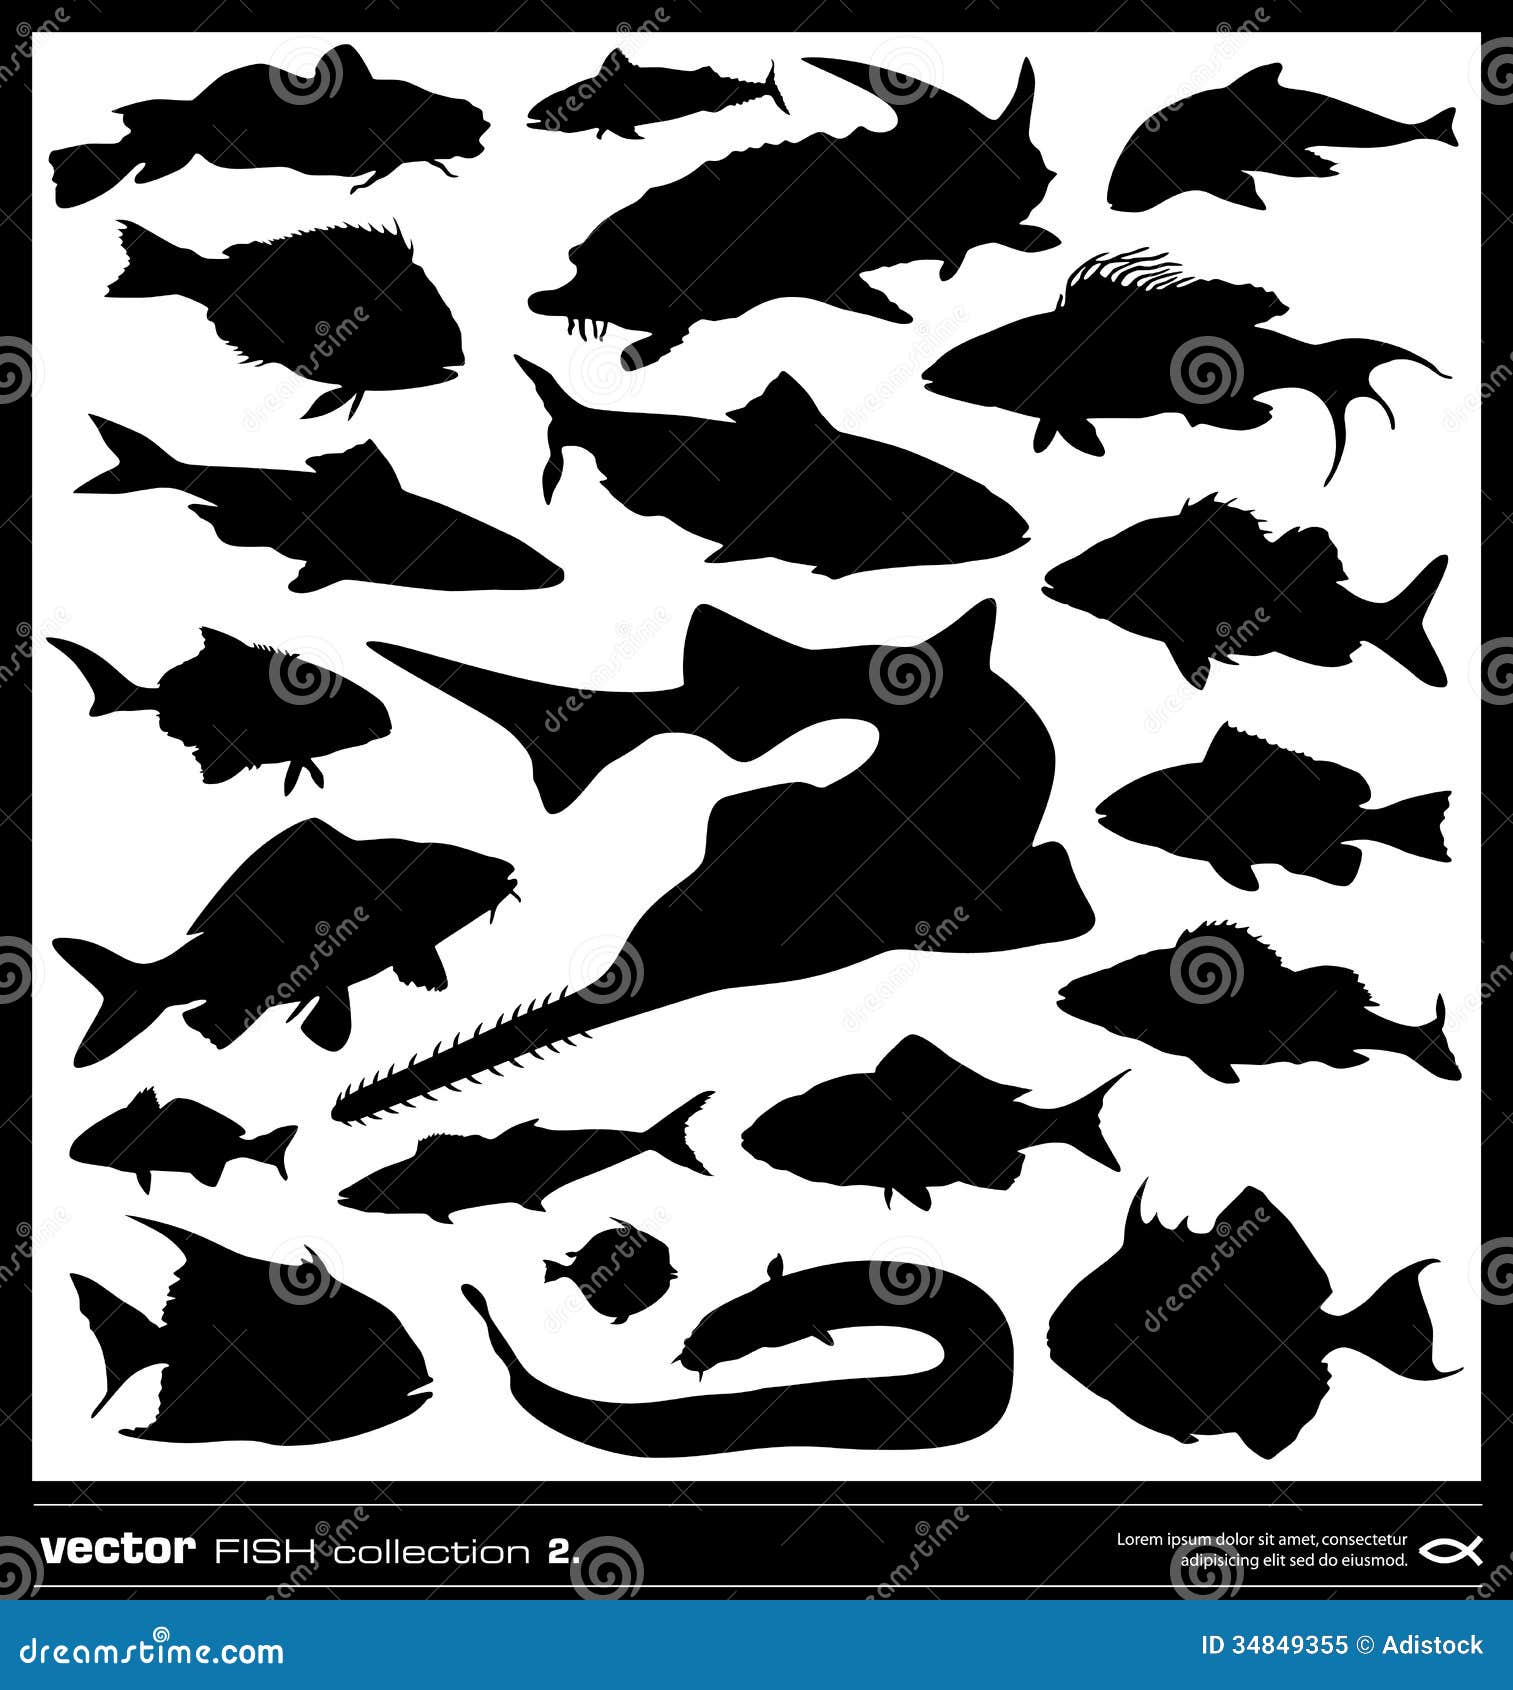 Download Fish, Silhouette, Water. Royalty-Free Vector Graphic